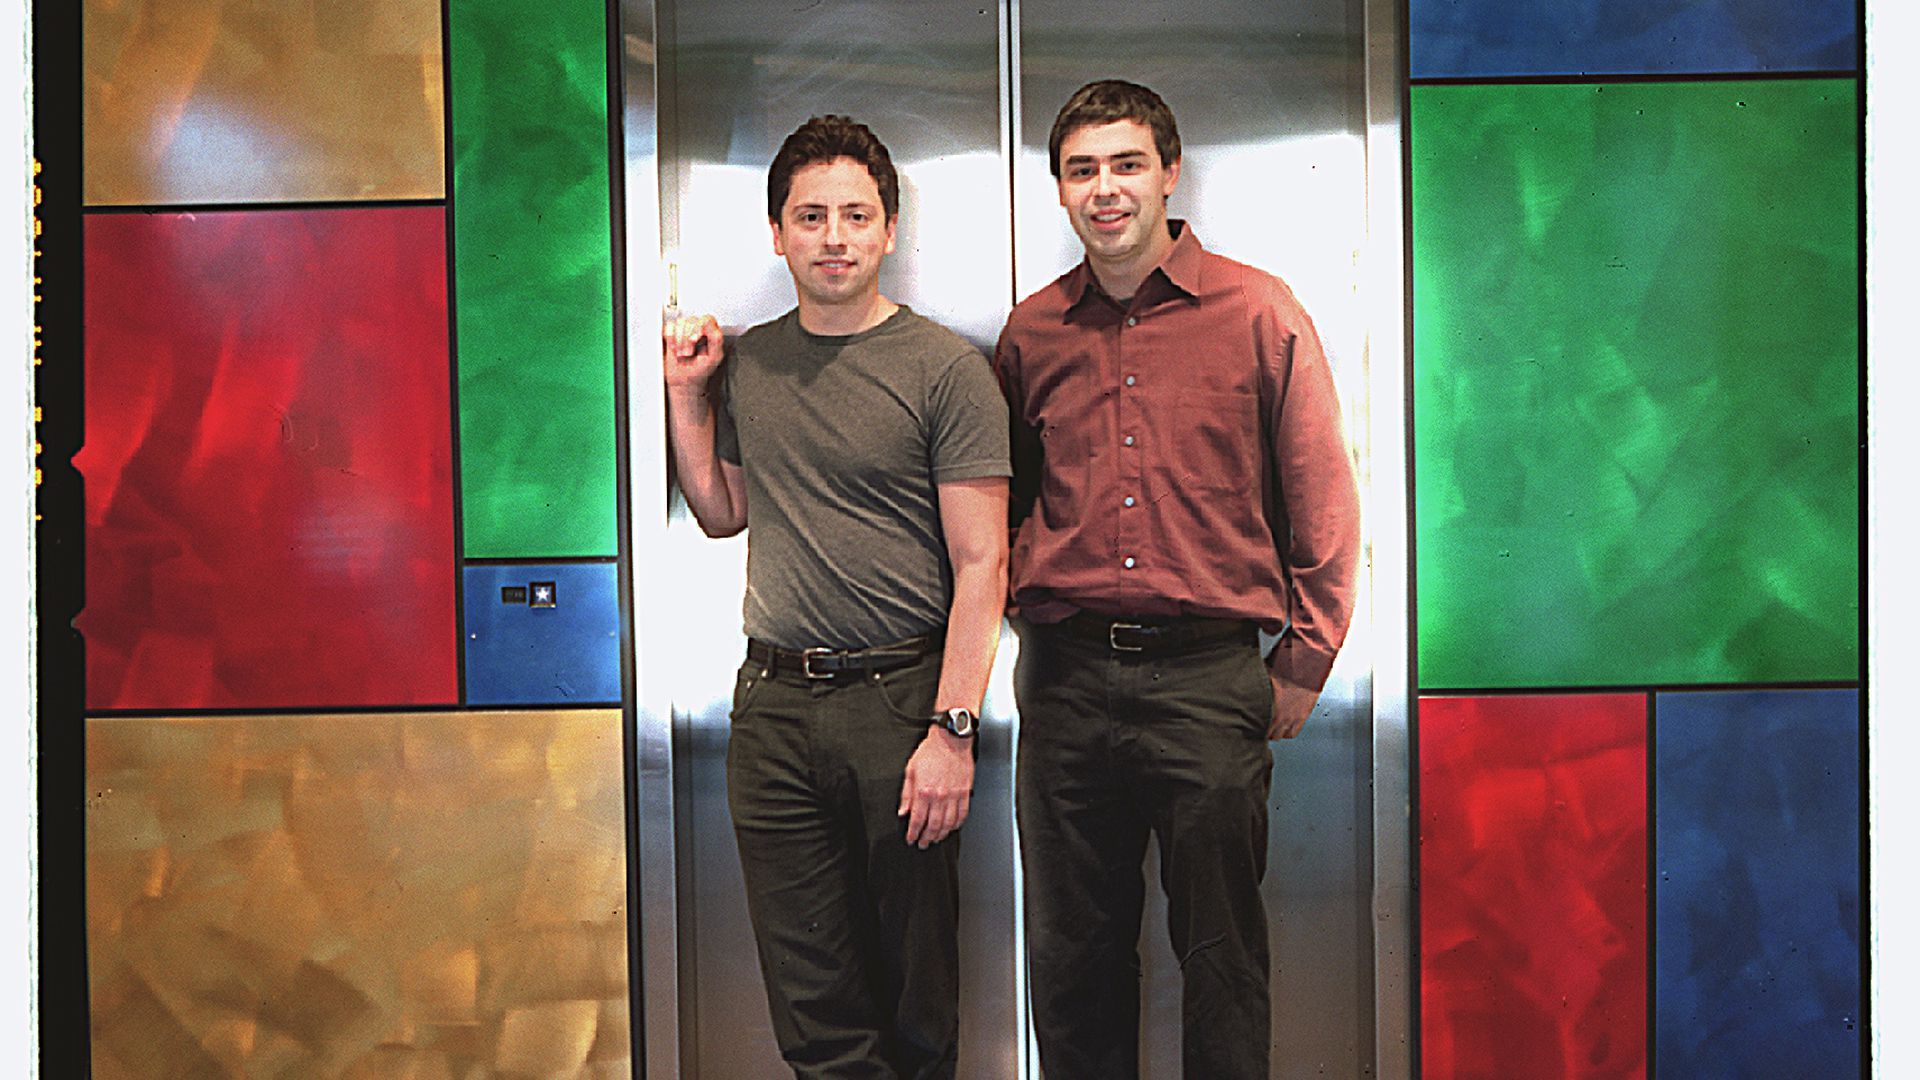 Larry Page and Sergey Brin's departure from Alphabet and Google